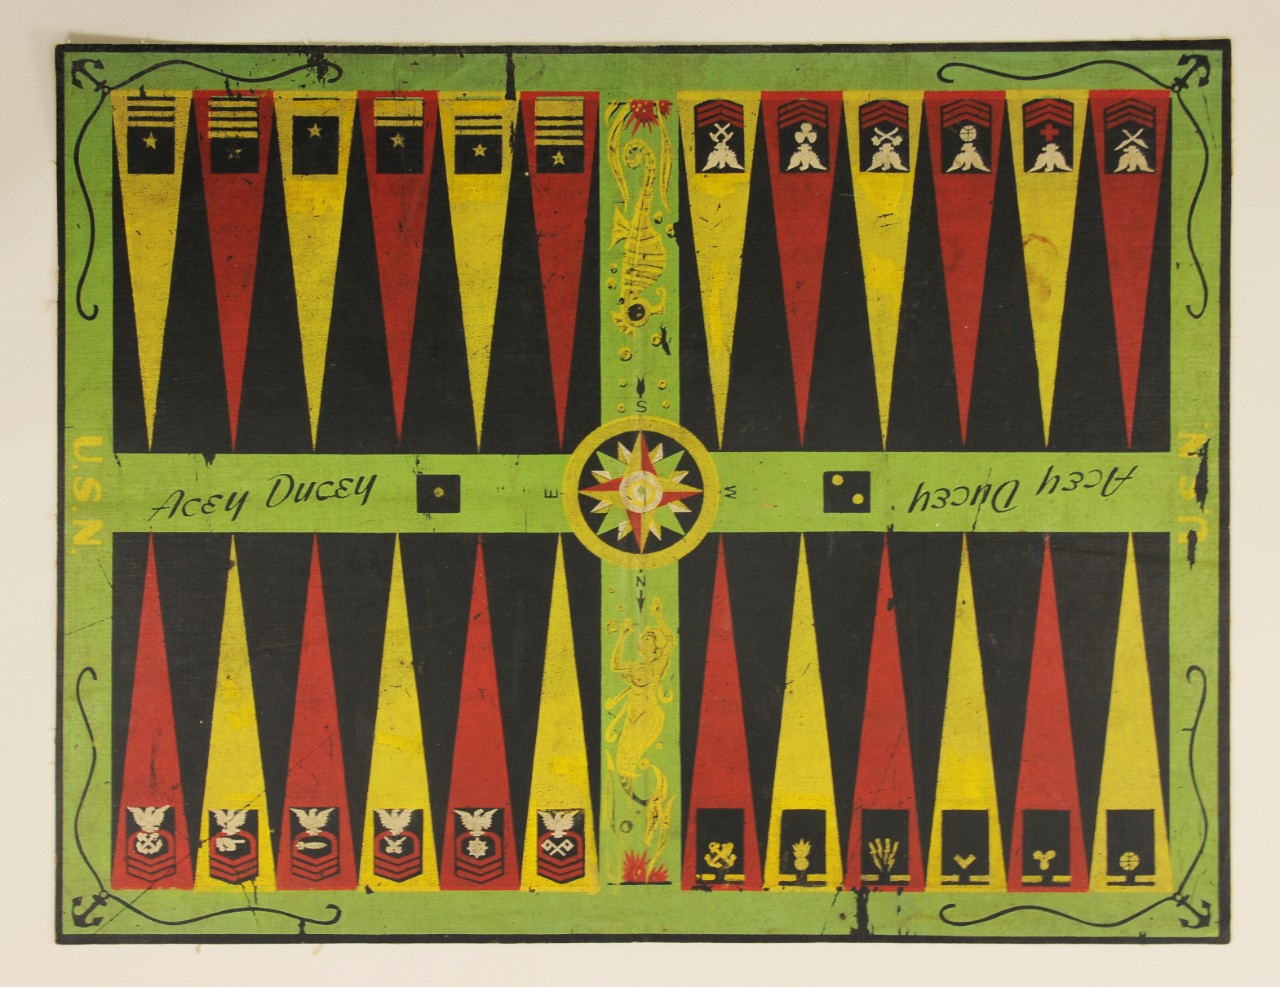 One colorful Navy themed acey ducey board with red yellow black and green colorations 